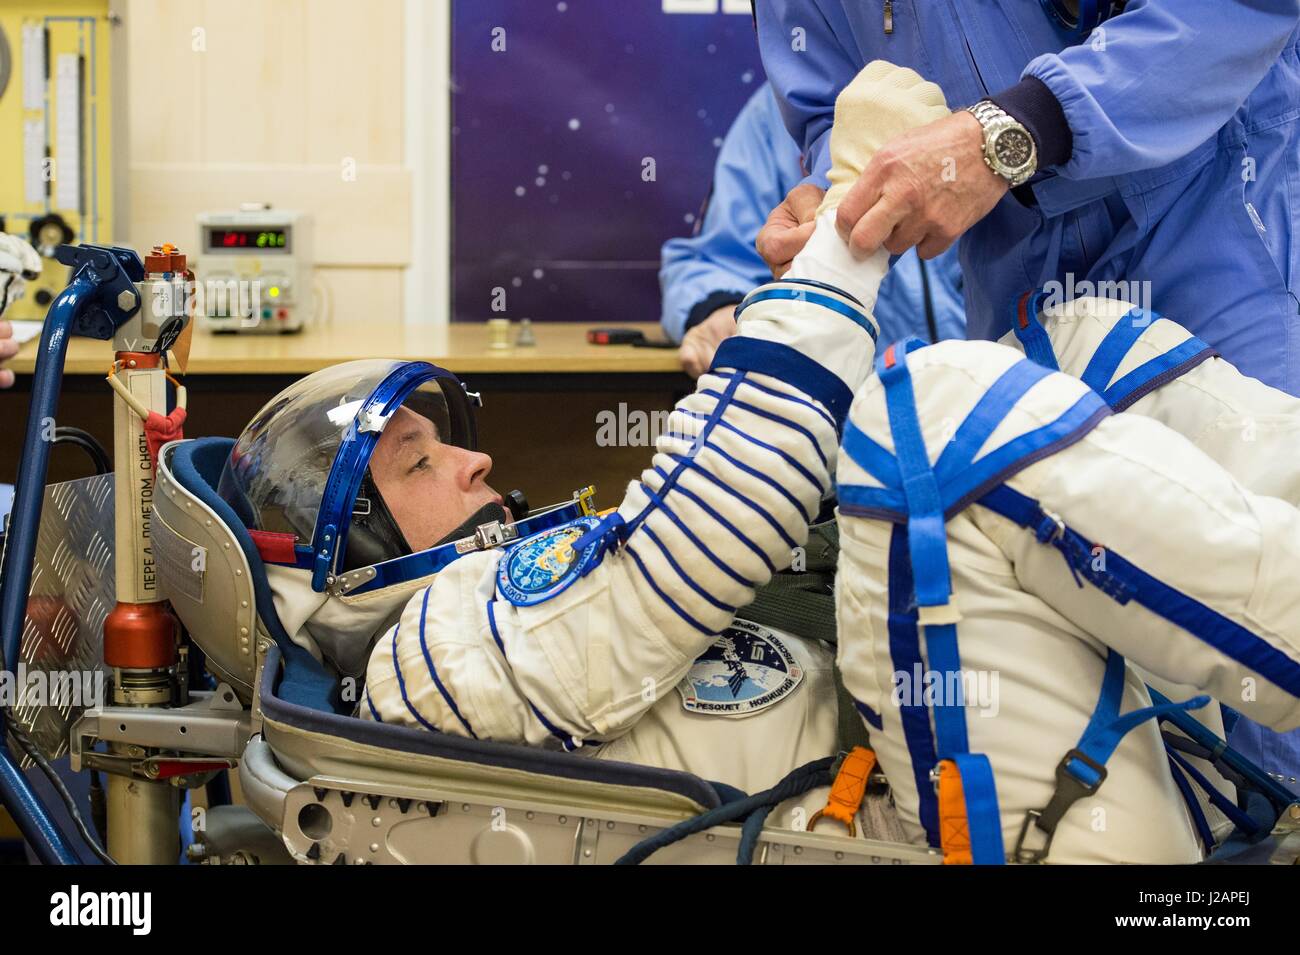 NASA International Space Station Expedition 51 prime crew member American astronaut Jack Fischer has his Russian Sokol launch and entry spacesuit pressure-checked in preparation for the Soyuz MS-04 launch at the Baikonur Cosmodrome April 20, 2017 in Baikonur, Kazakhstan.     (photo by Andrey Shelepin/NASA  via Planetpix) Stock Photo